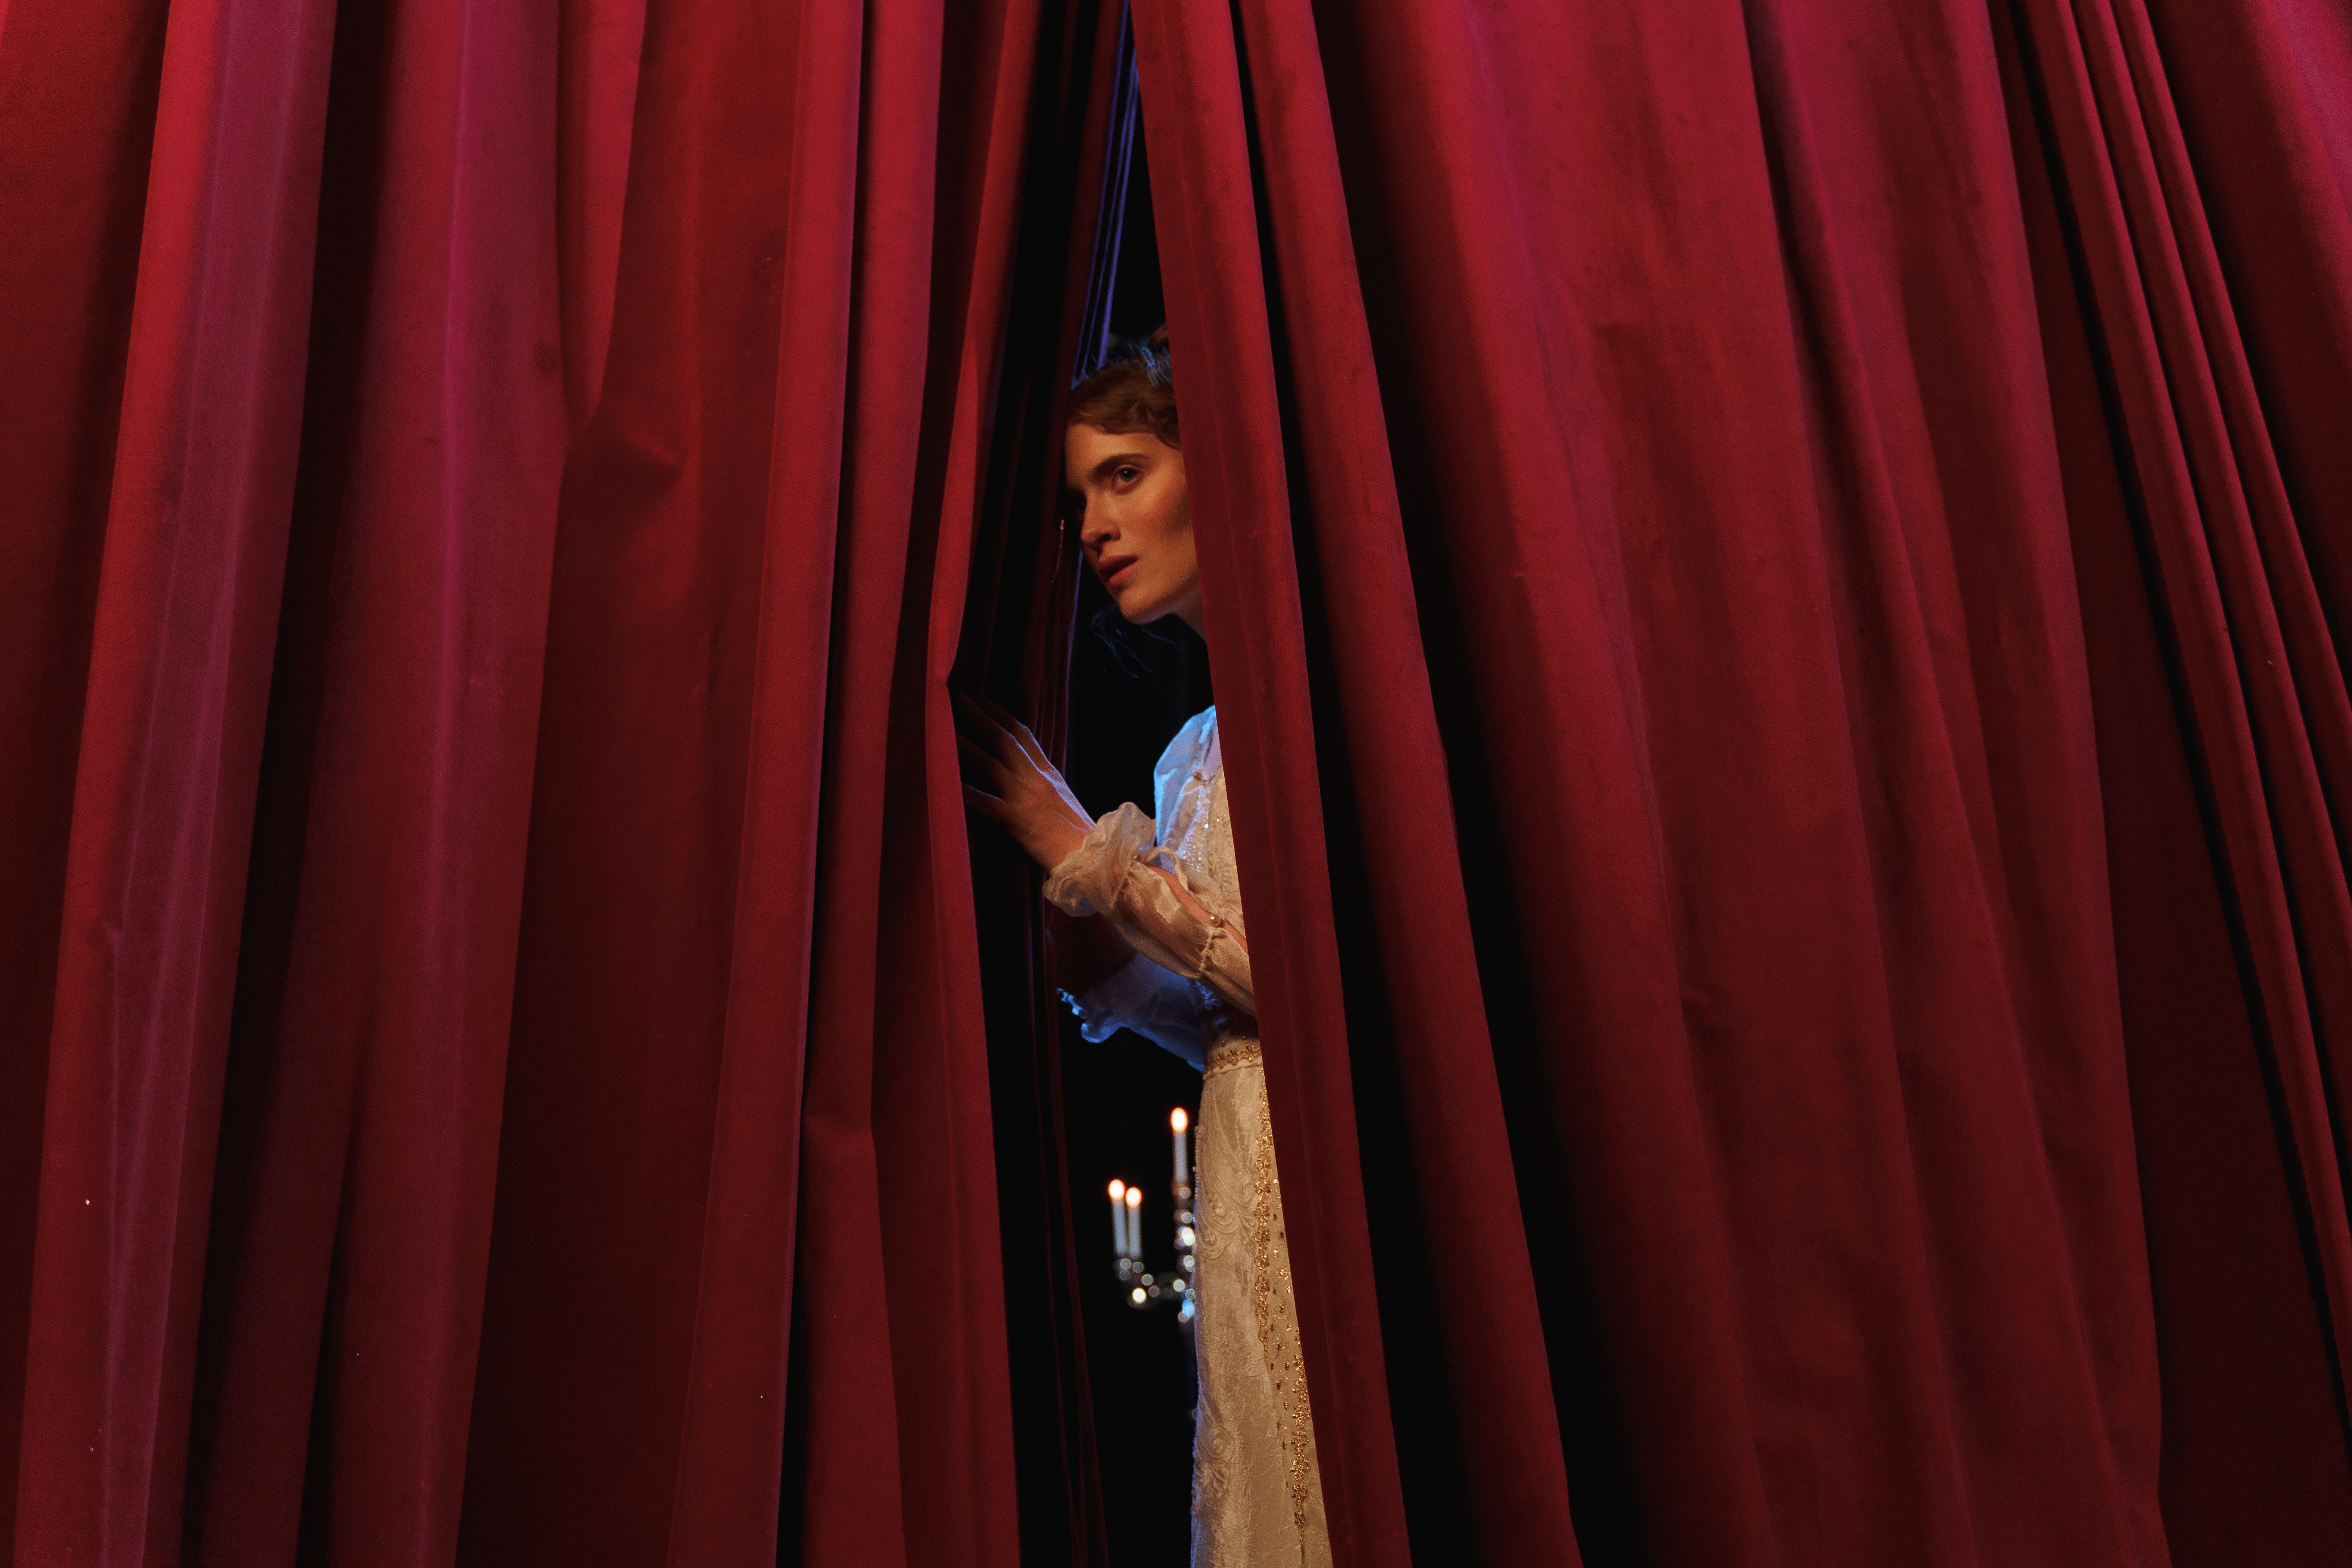 Woman Actress Emerging from Curtain